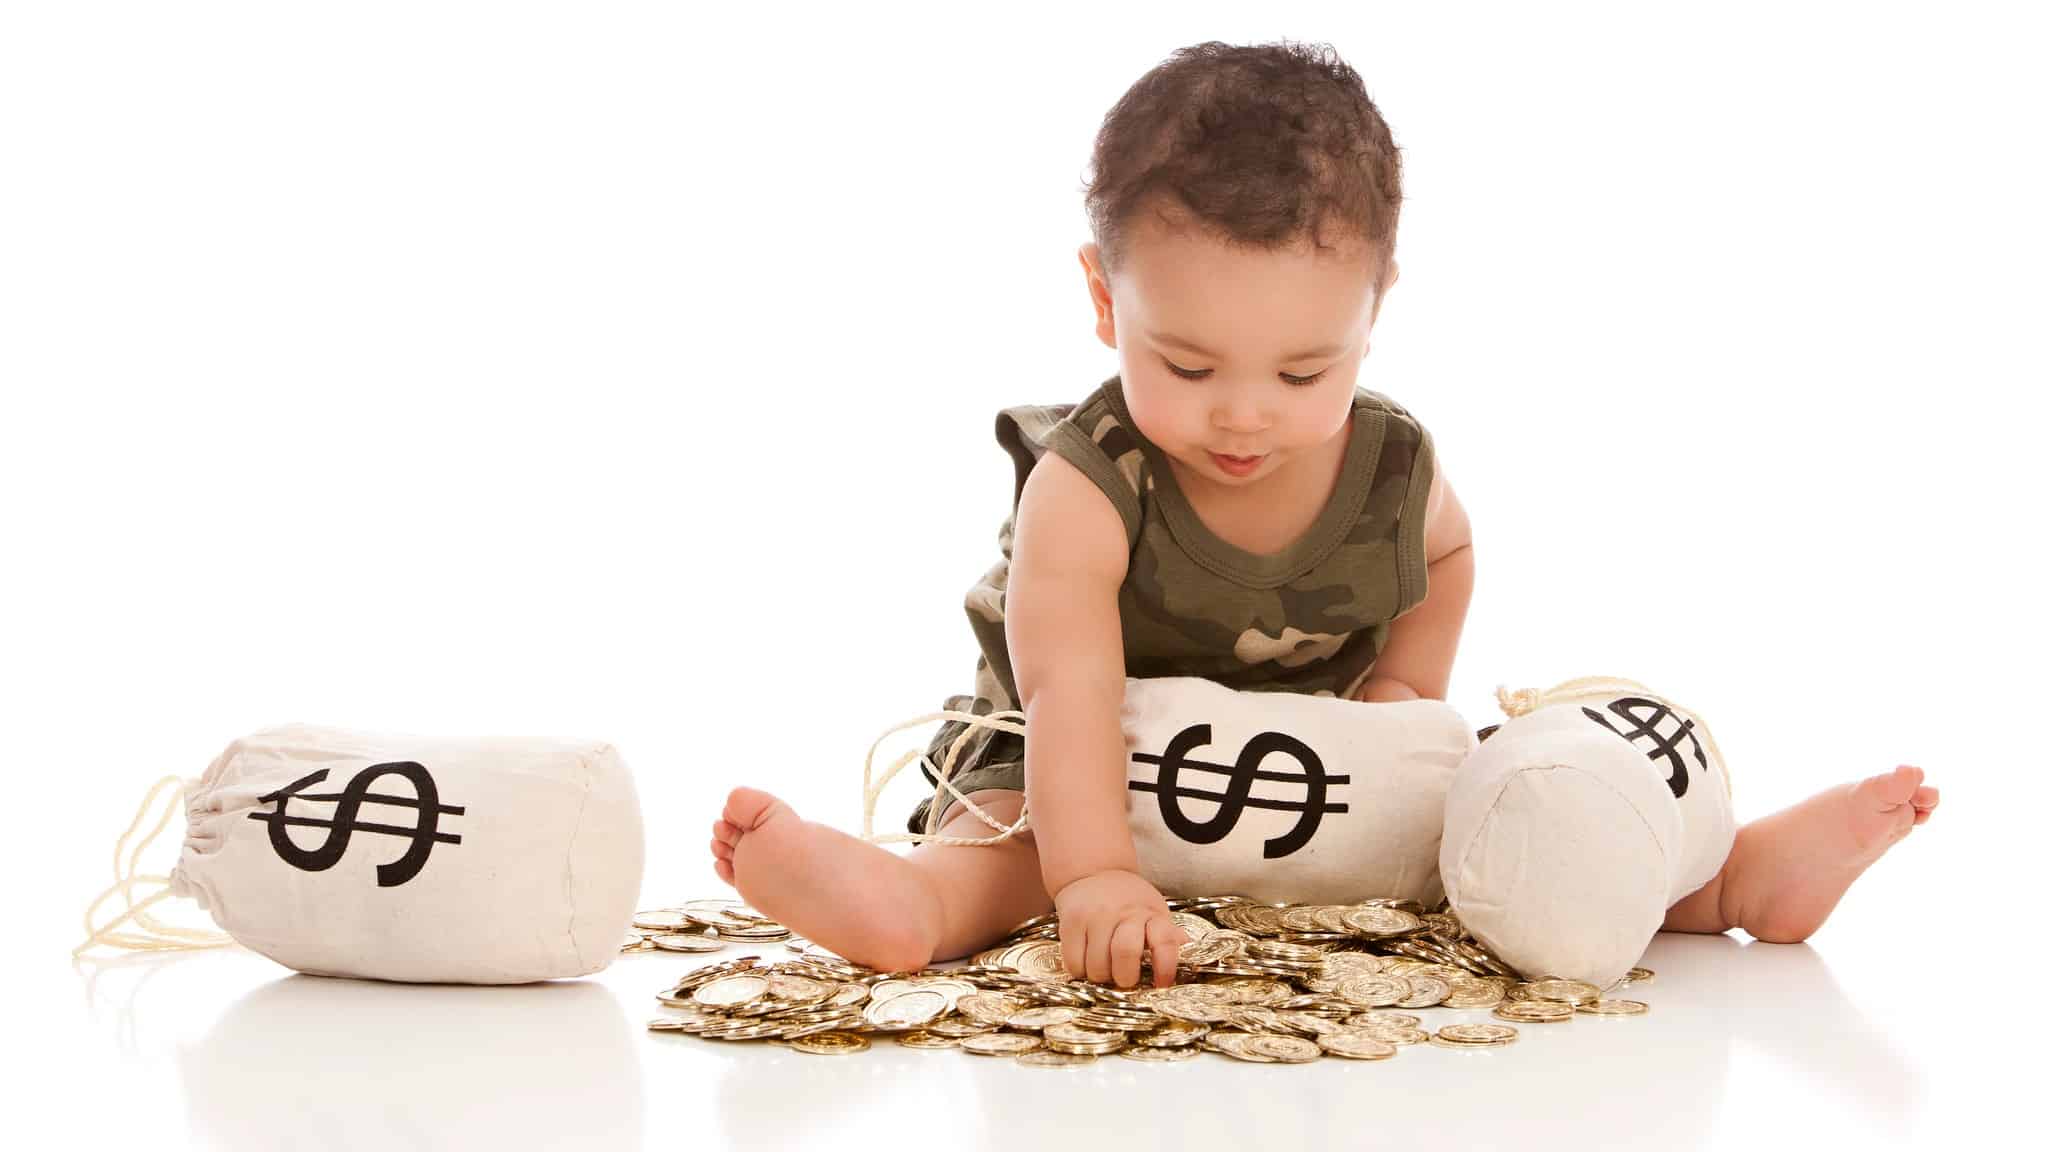 asx shares beginner investor represented by baby playing with gold coins and bags of money